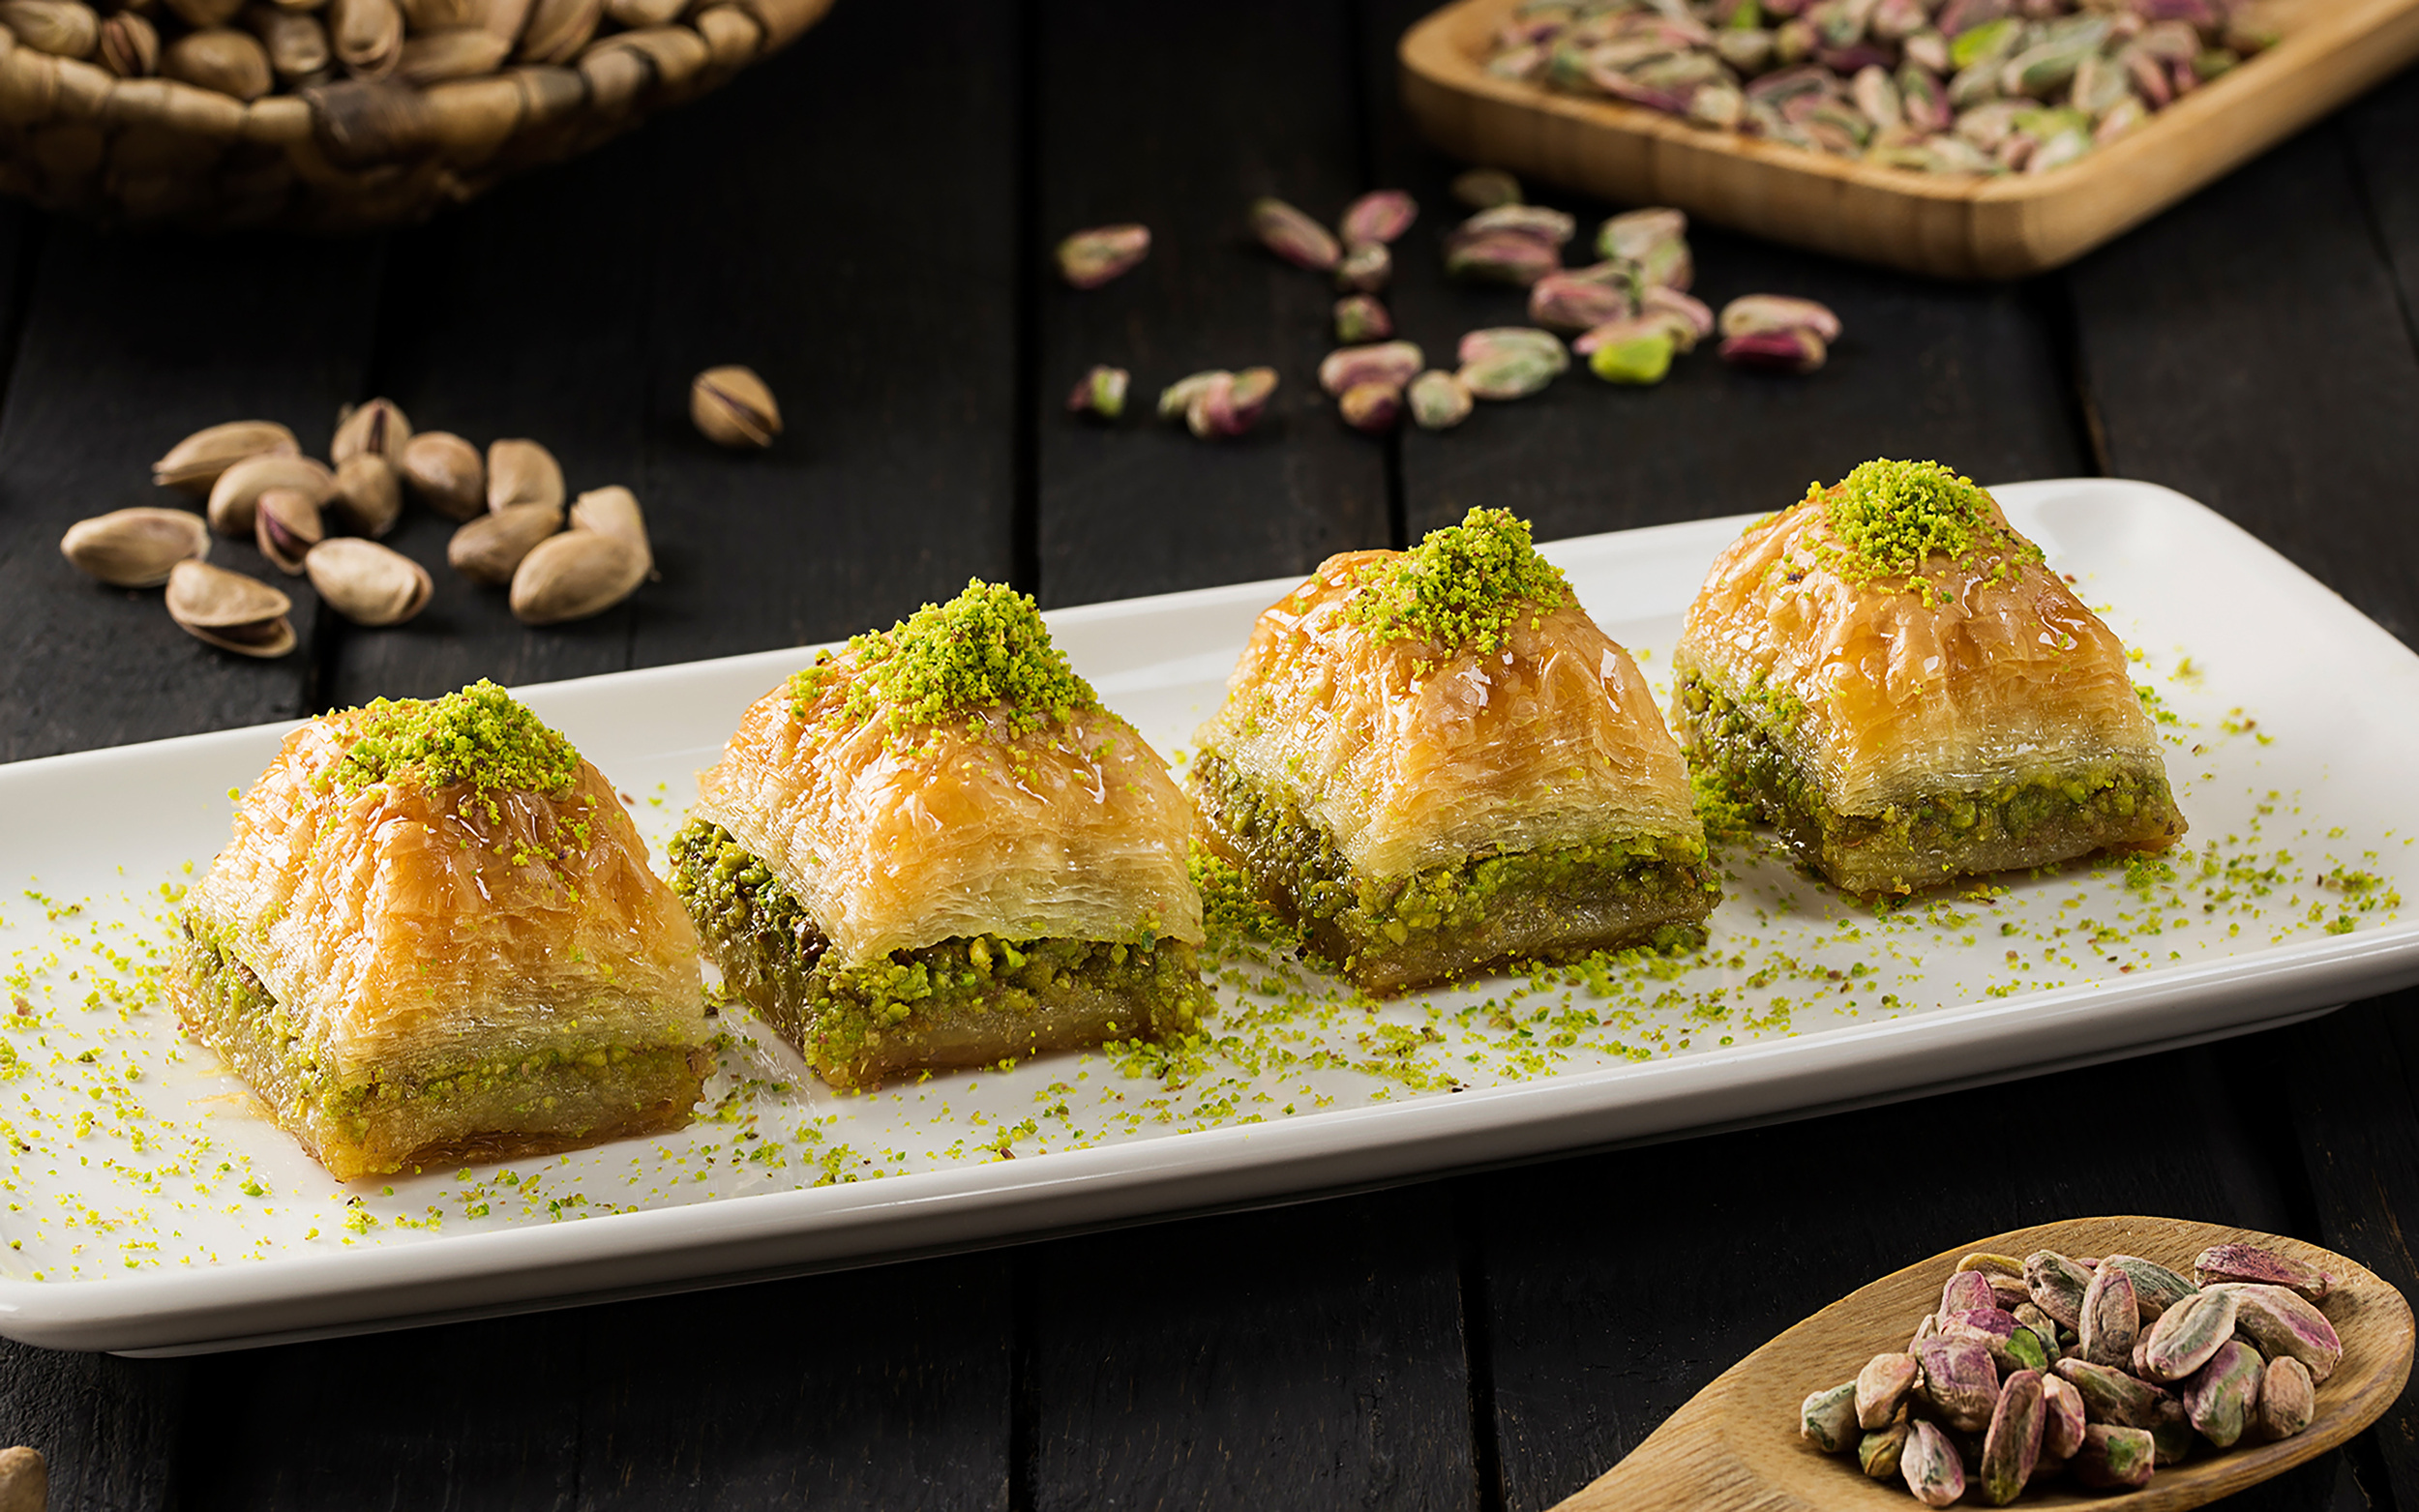 <p>You’ve likely tried (or at least heard of) <em>baklava</em>, but have you ever considered making it at home? Store-bought dough makes <a href="https://www.simplyrecipes.com/recipes/baklava/"><span>this version from Simply Recipes</span></a> a snap, but the presentation — featuring phyllo layered with honey, nuts, and spices — is sure to impress your guests…or your family…or just yourself!</p><p><a href='https://www.msn.com/en-us/community/channel/vid-cj9pqbr0vn9in2b6ddcd8sfgpfq6x6utp44fssrv6mc2gtybw0us'>Follow us on MSN to see more of our exclusive lifestyle content.</a></p>